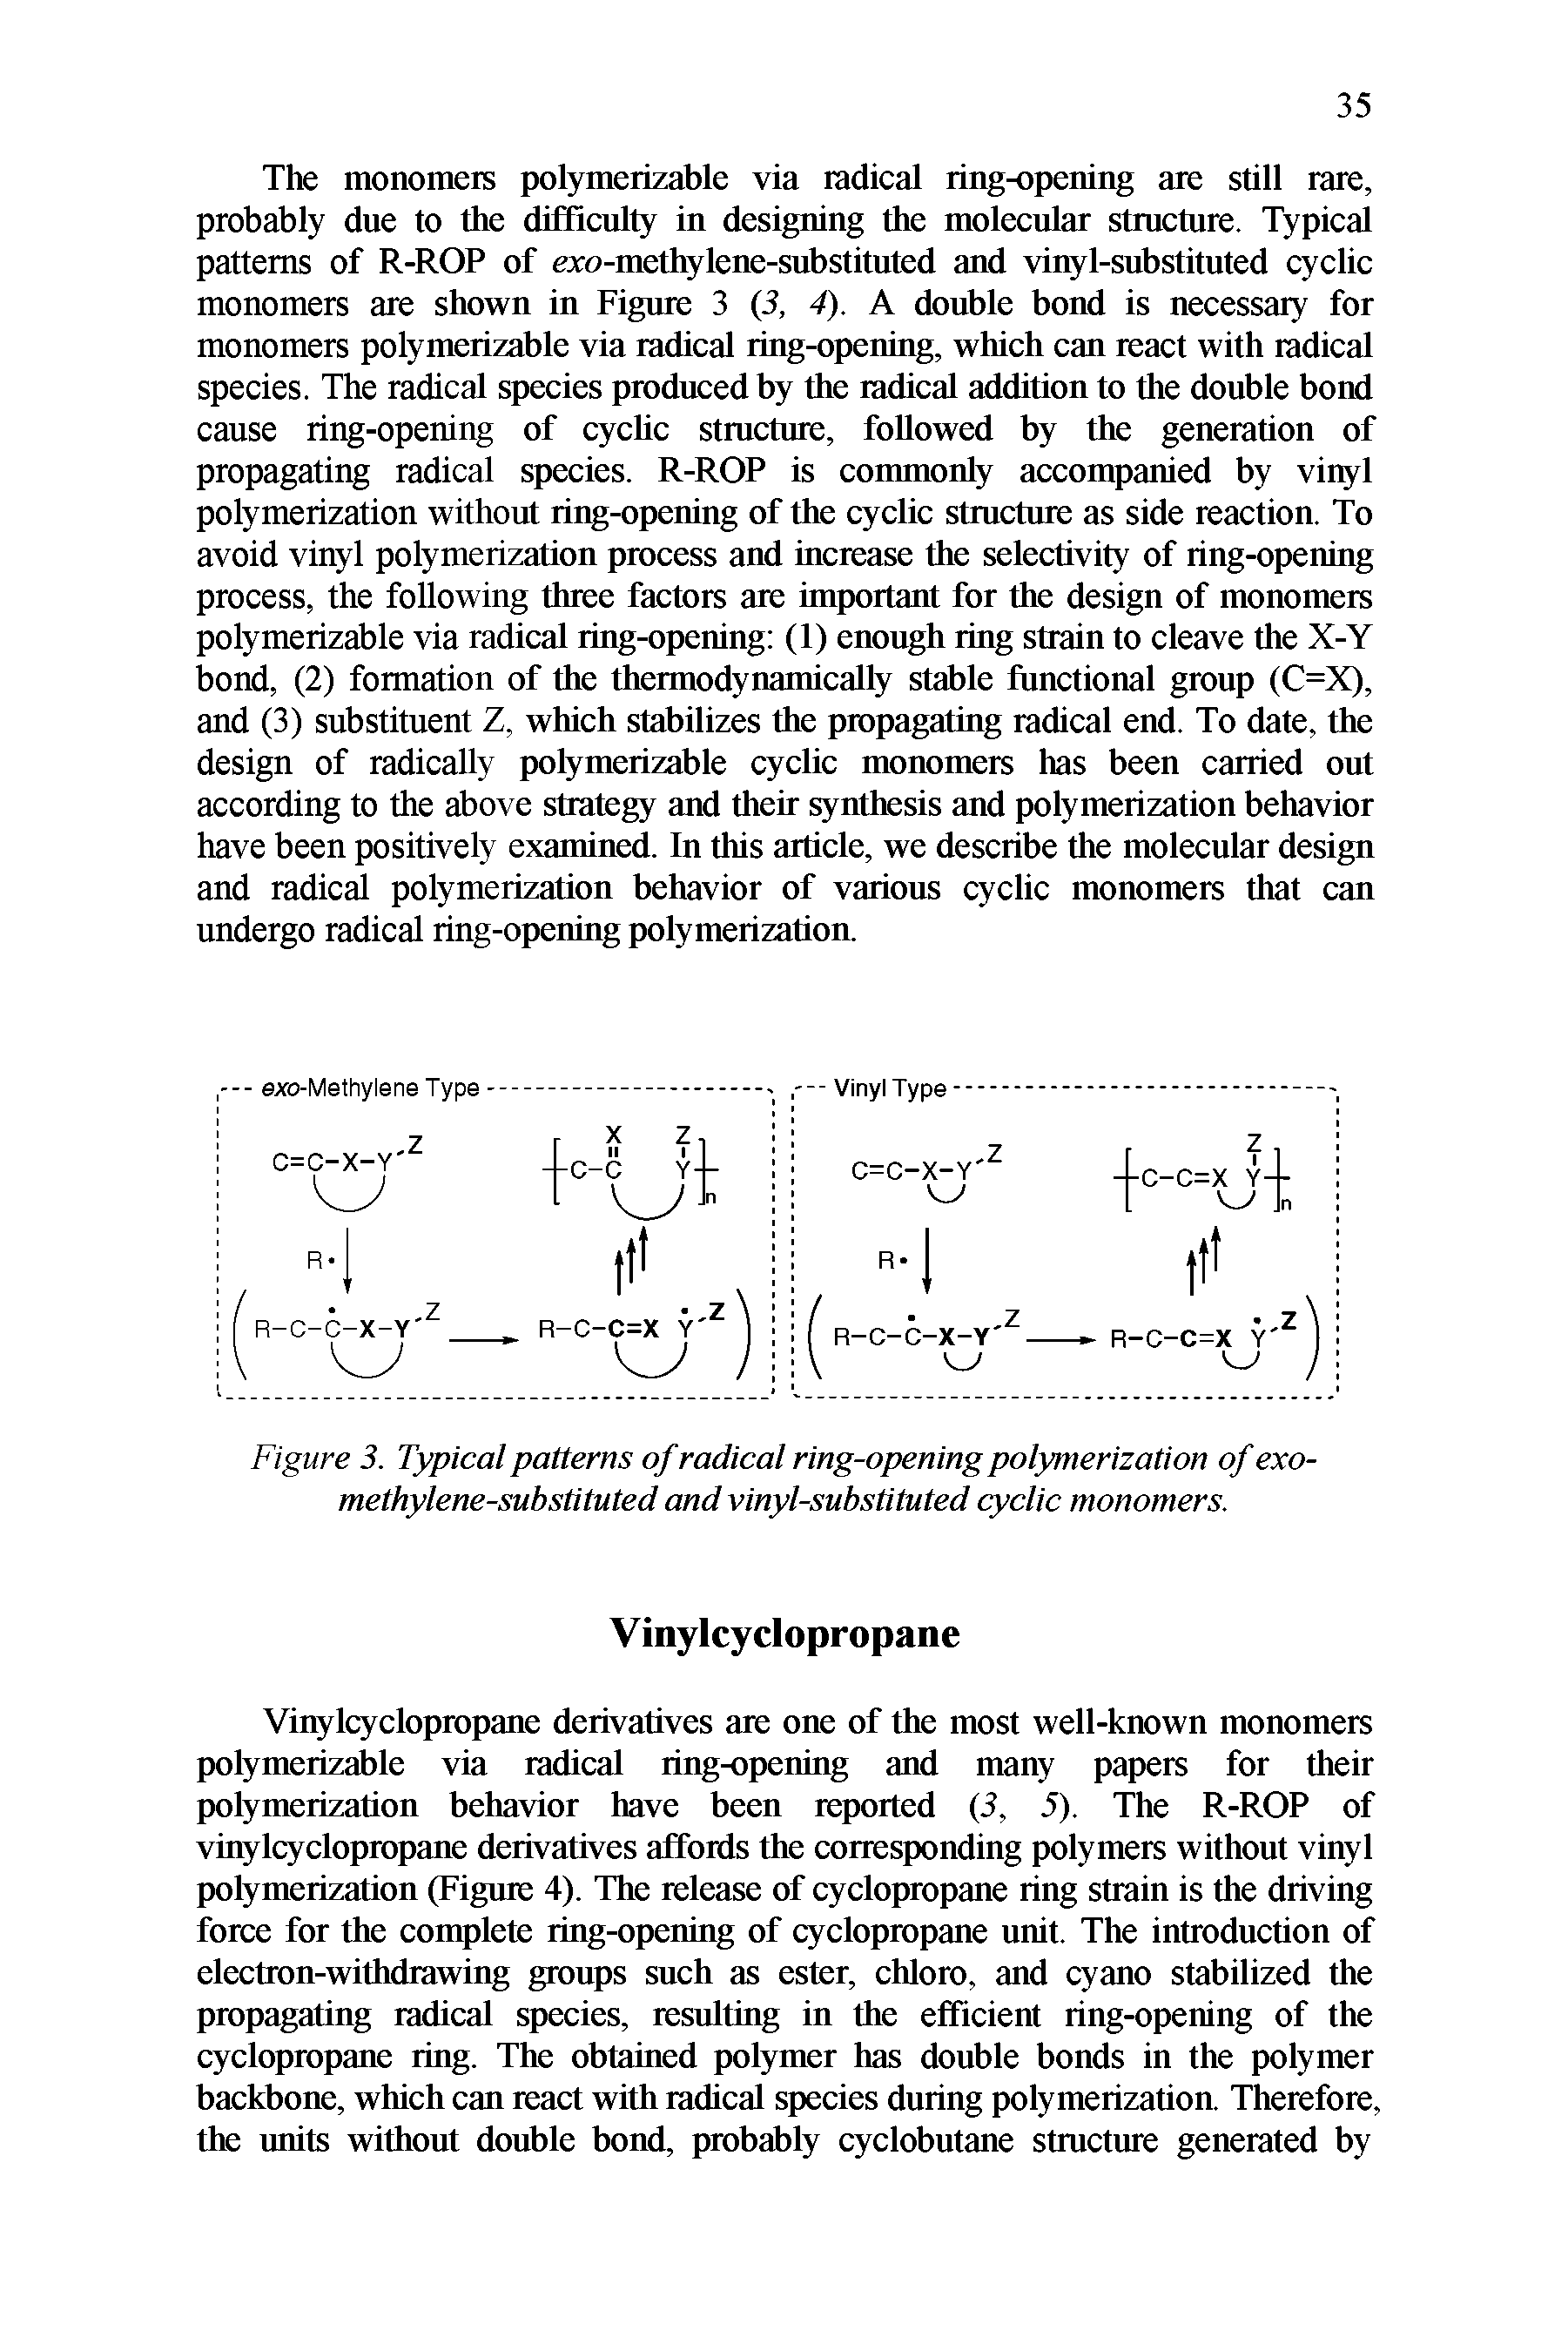 Figure 3. Typical patterns of radical ring-opening polymerization of exomethylene-sub stttuted and vinyl-substituted cyclic monomers.